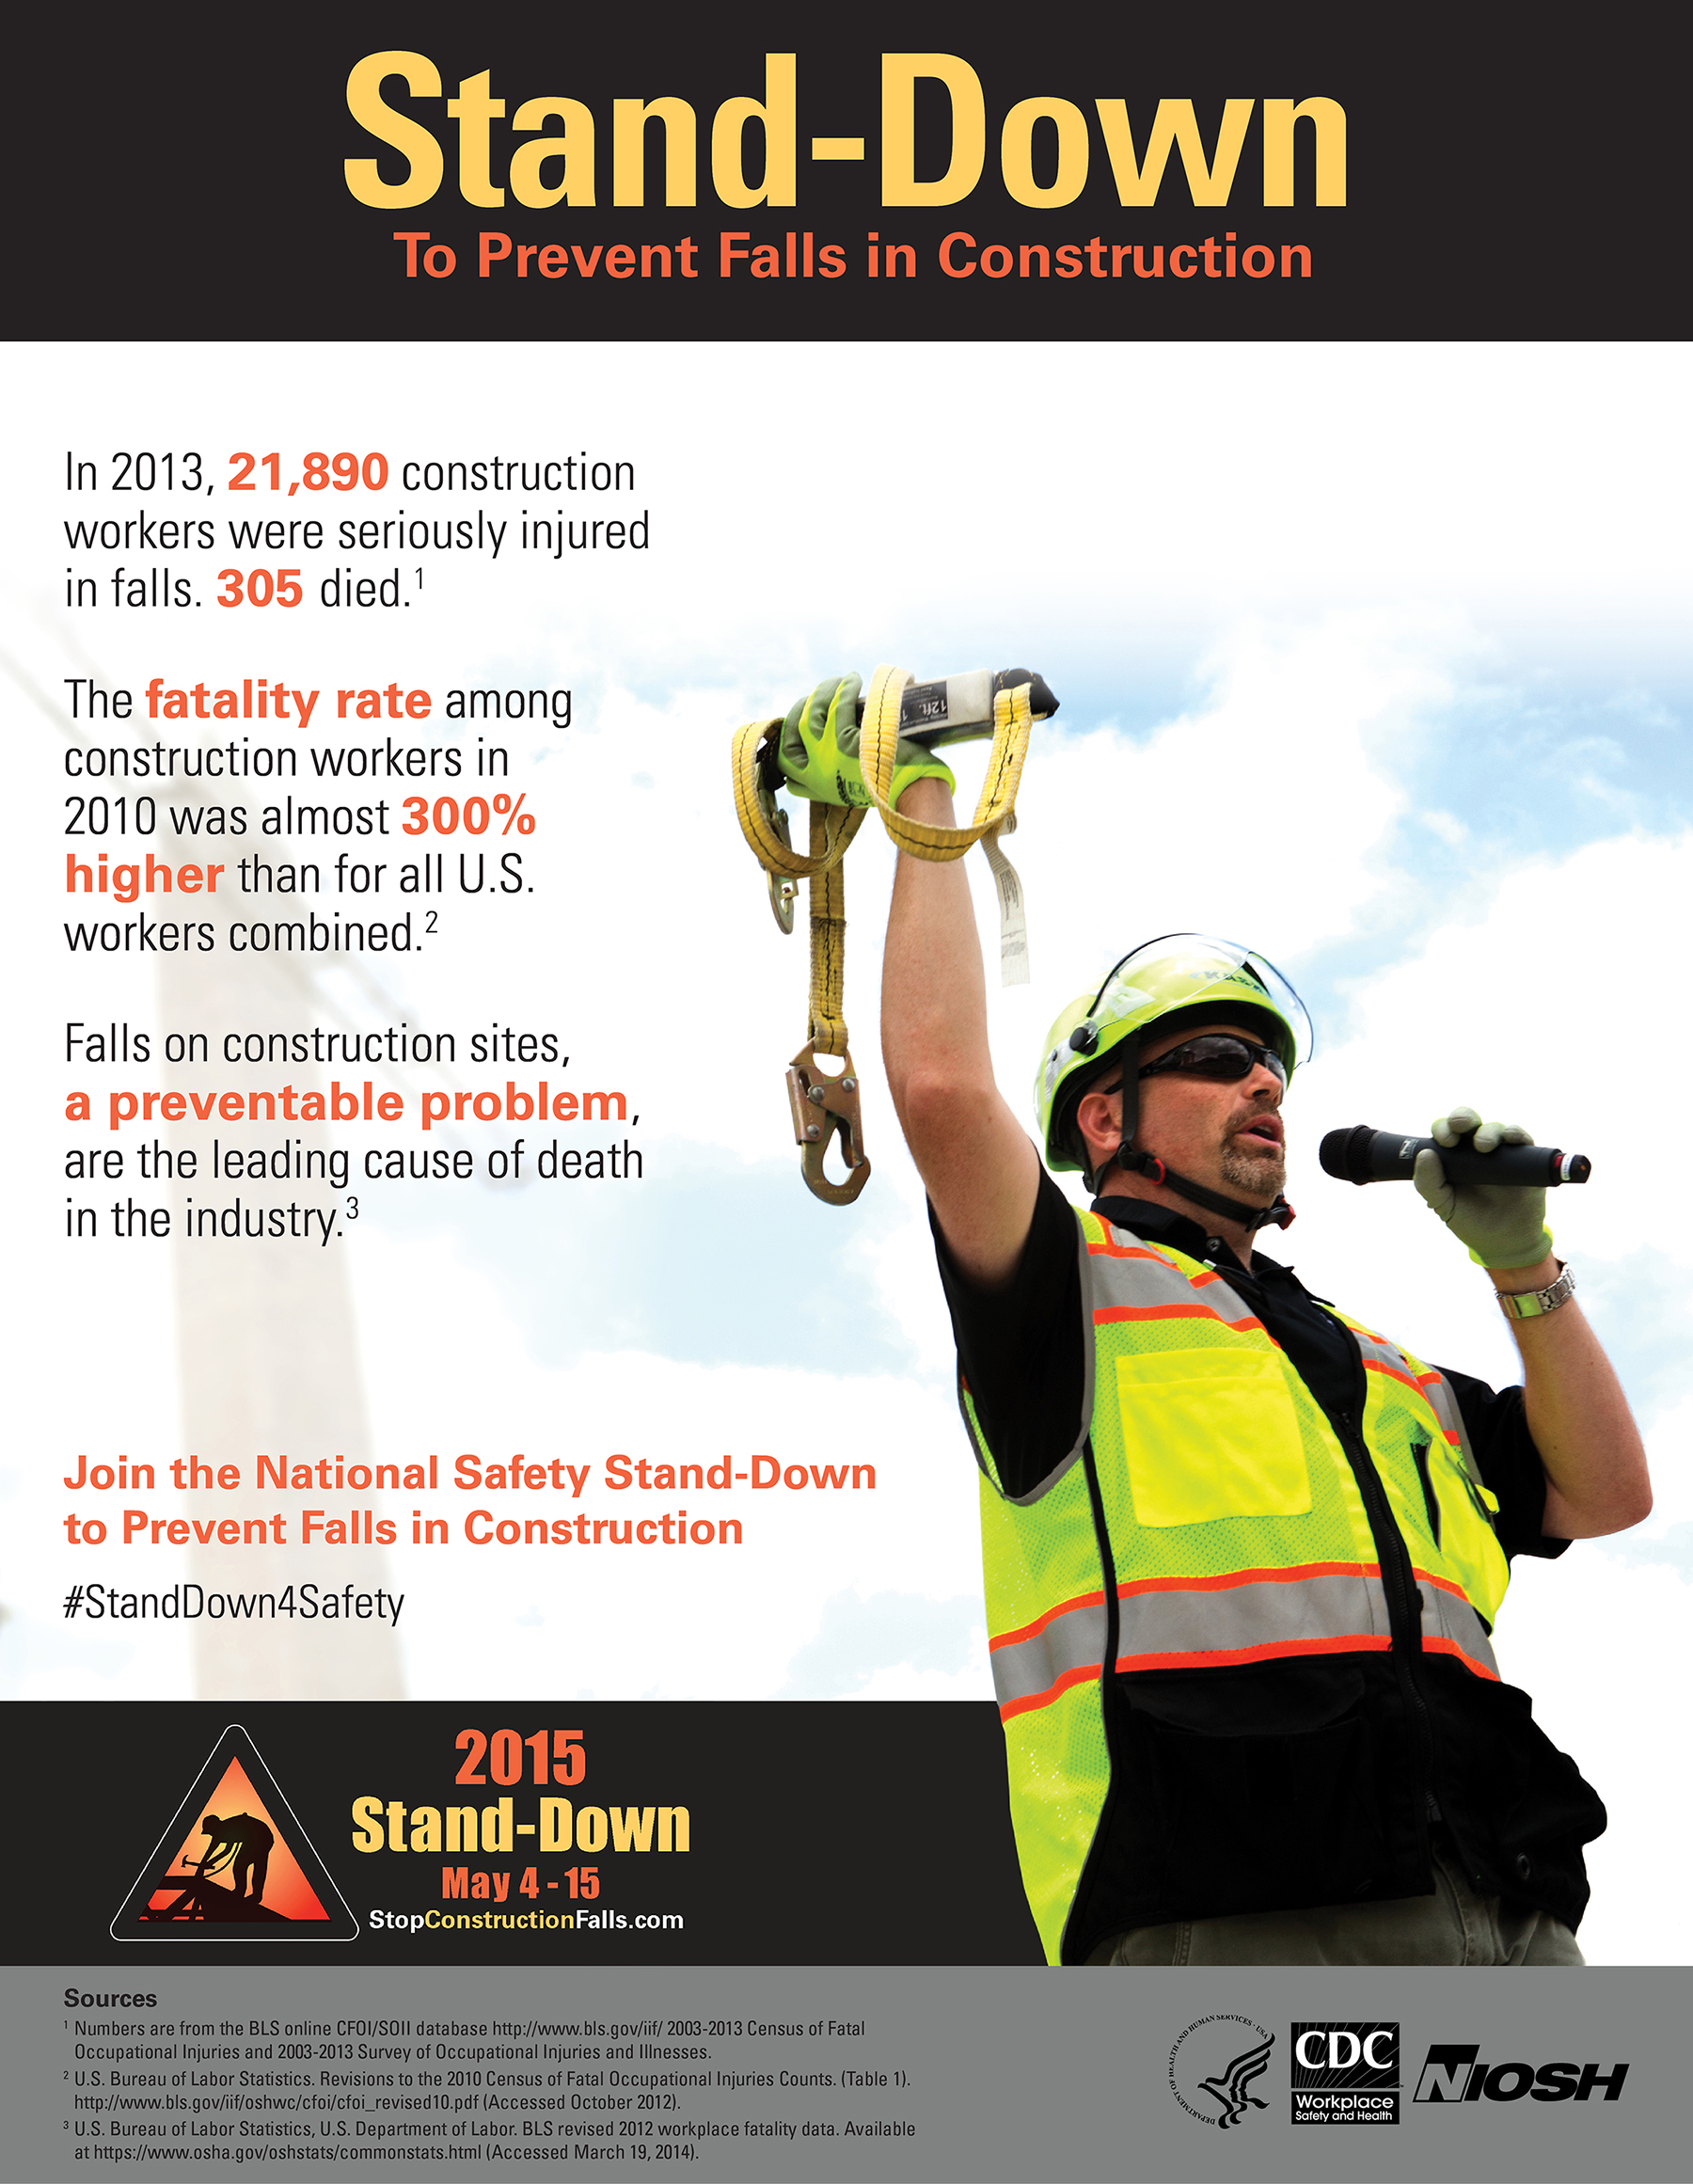 The StandDown Is On! Join the National Safety Standdown to Prevent